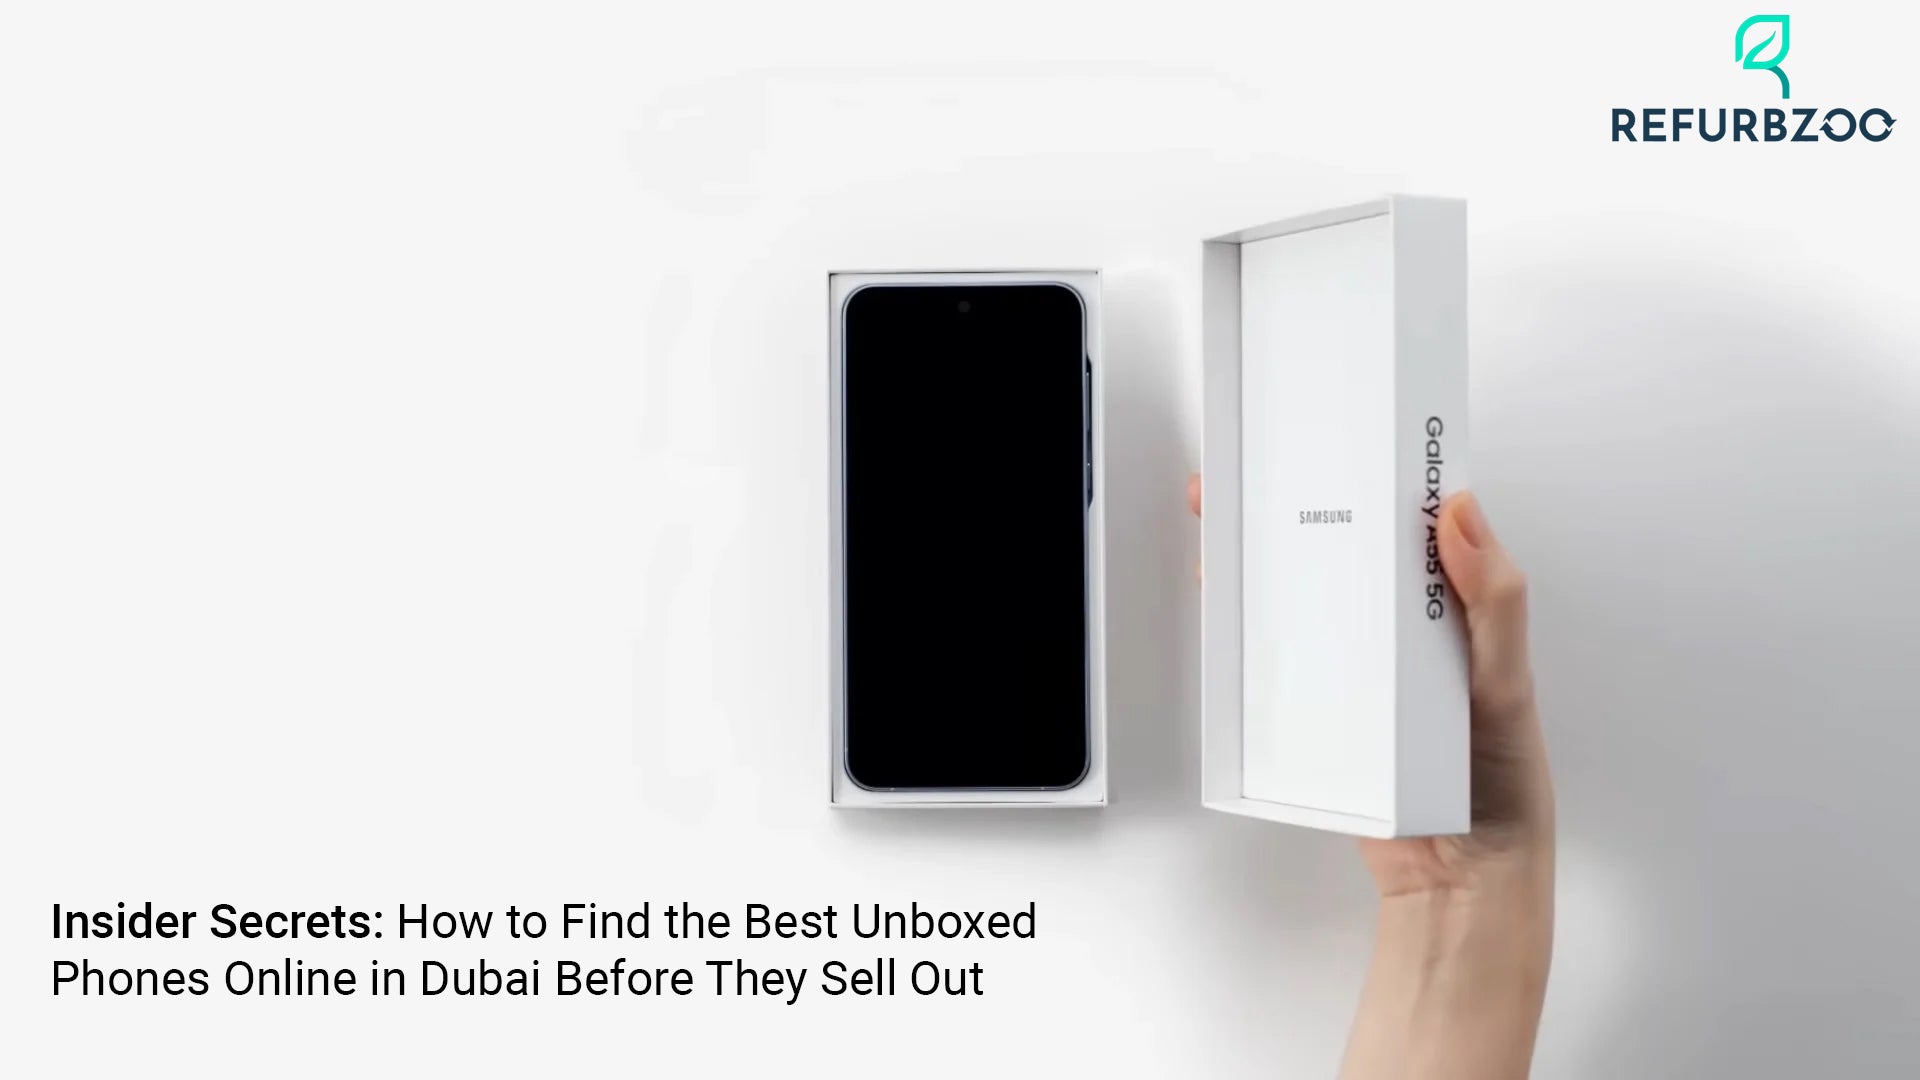 Insider Secrets: How to Find the Best Unboxed Phones Online in Dubai Before They Sell Out